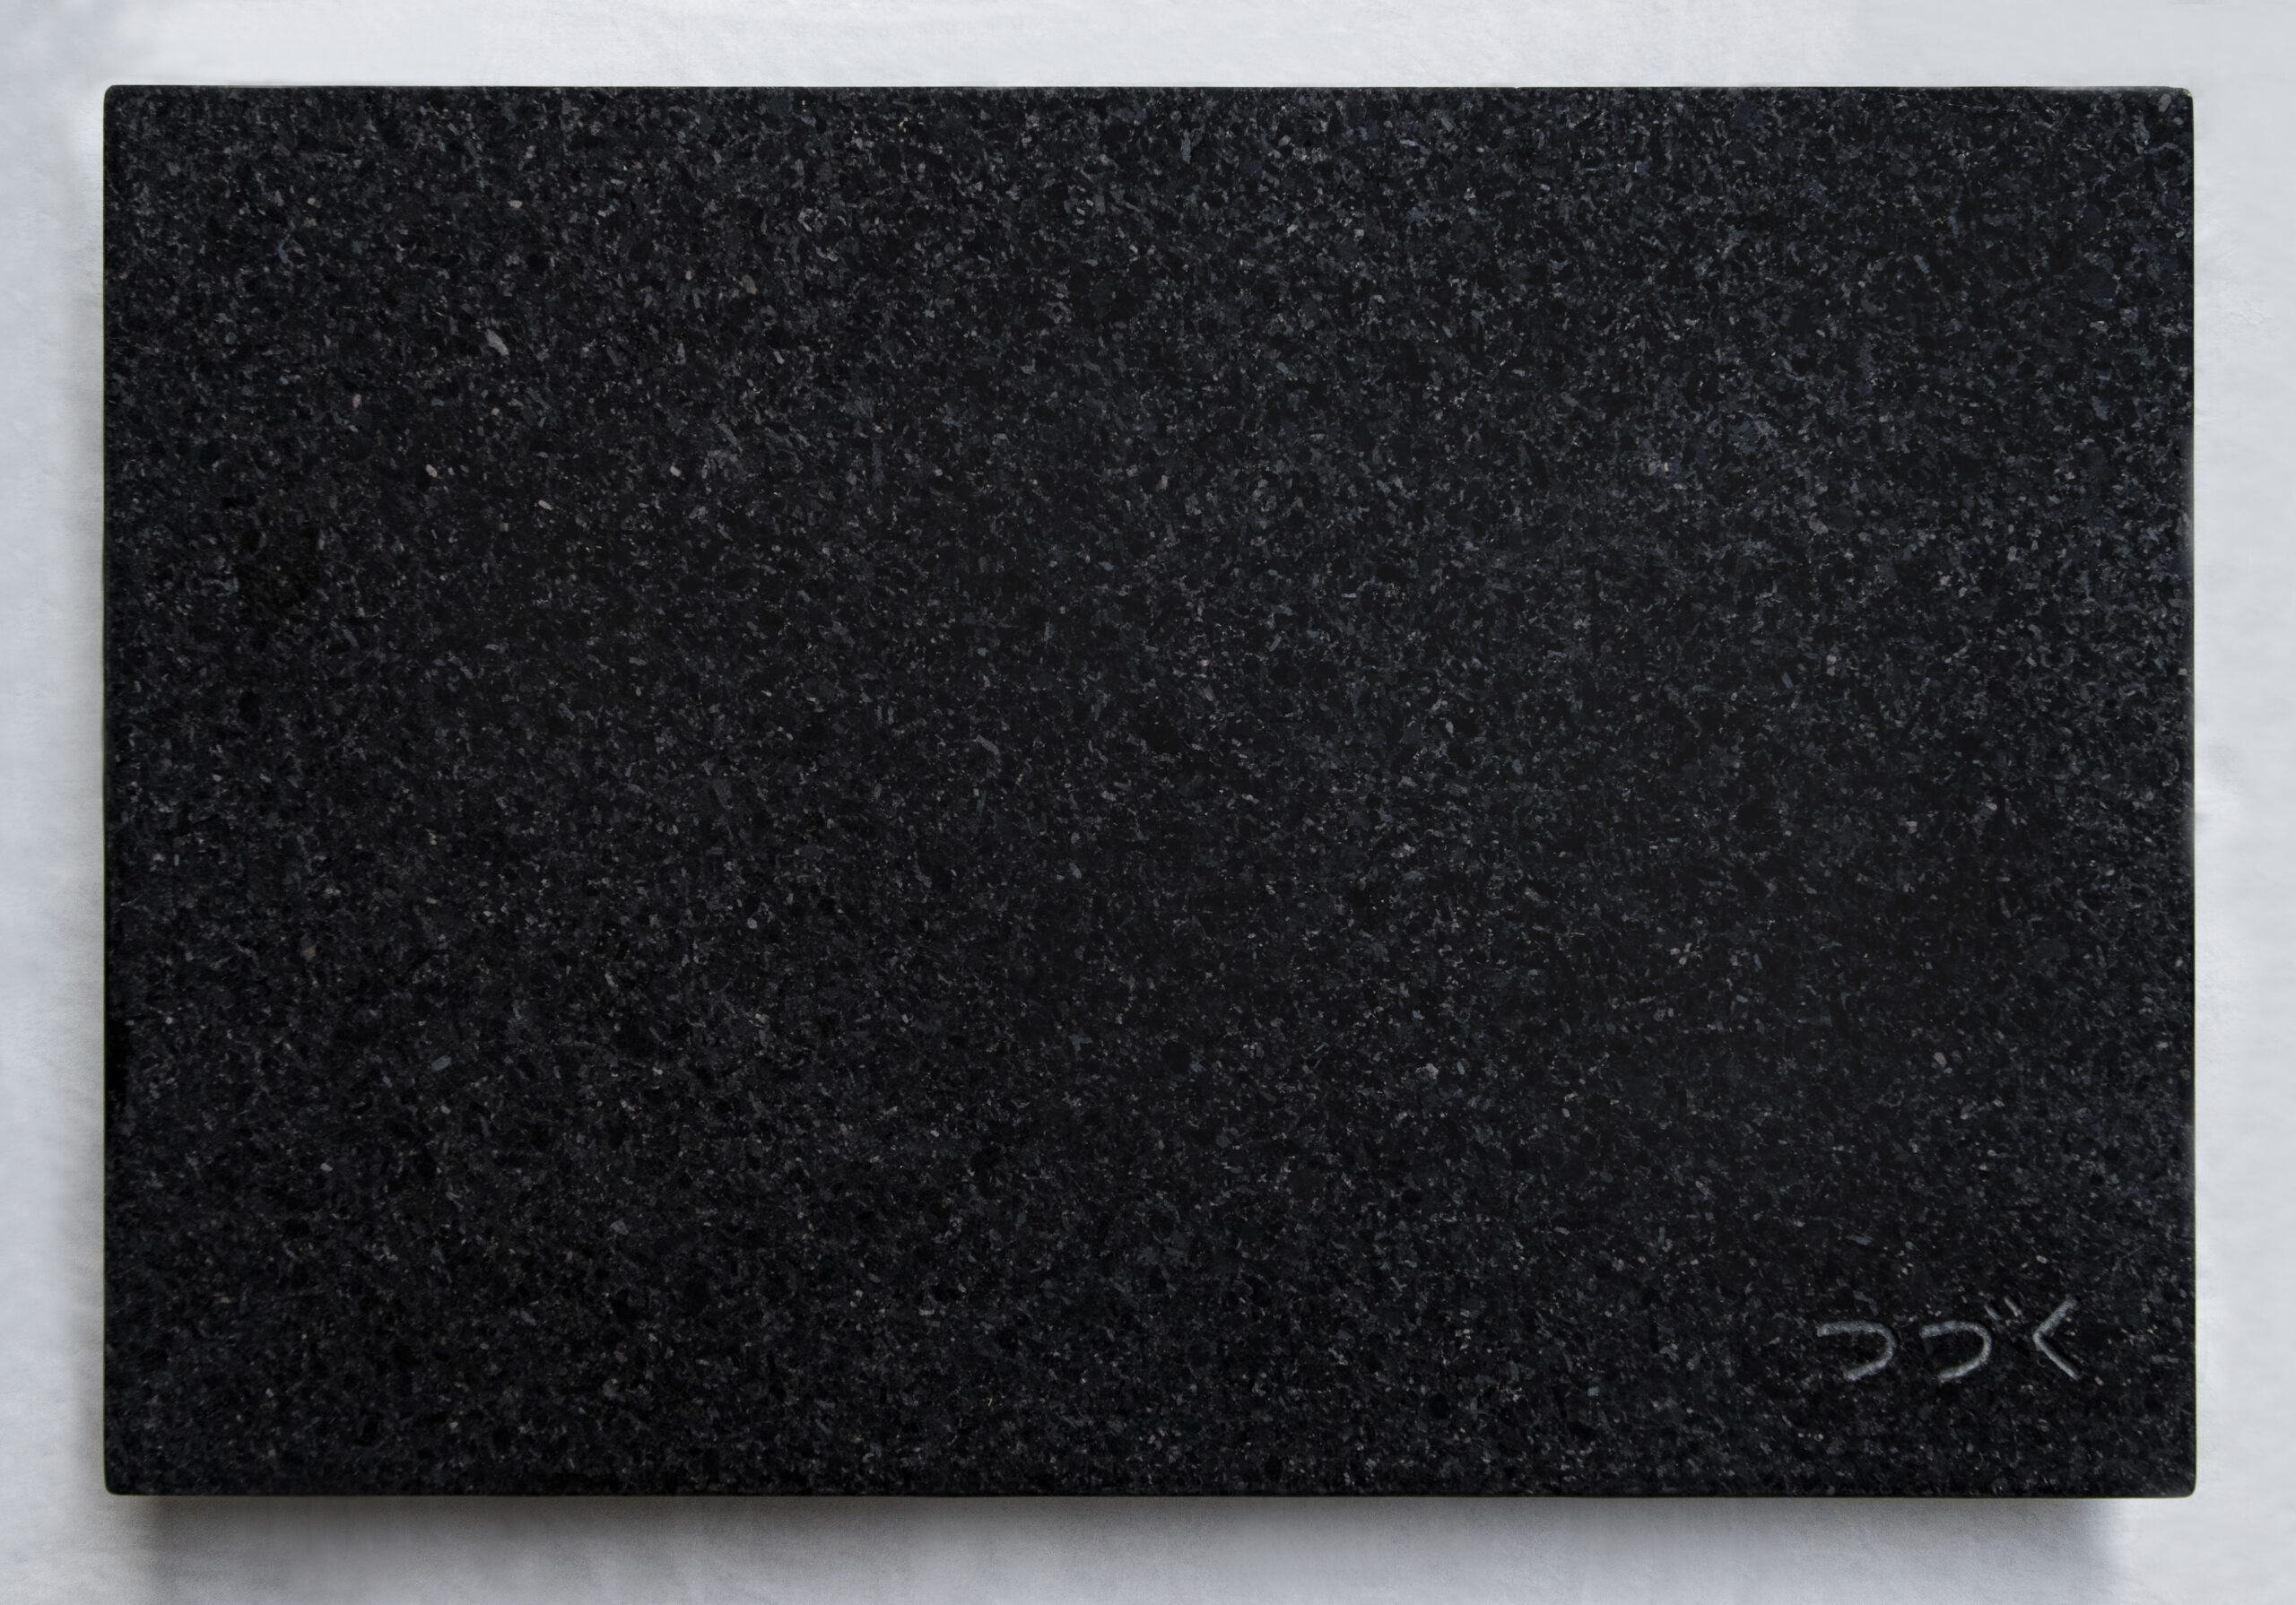 Africa black granite, 43,5 x 29 cm - Marco Curiale - courtesy of the artist